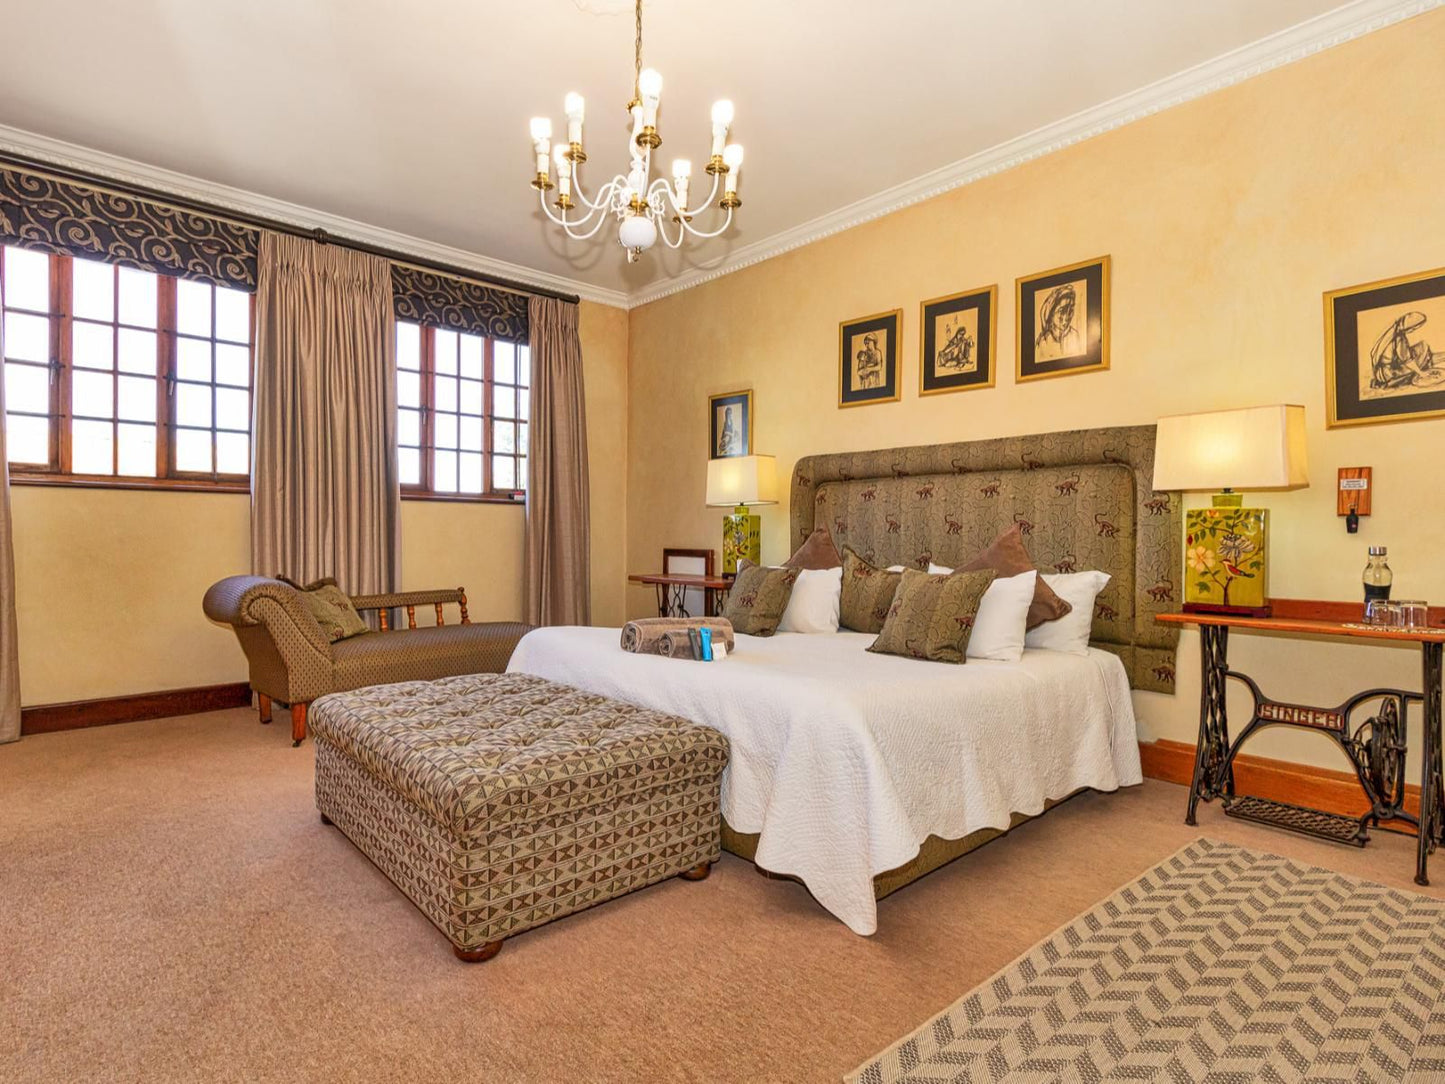 Two King George S Guest House Mill Park Port Elizabeth Eastern Cape South Africa Bedroom